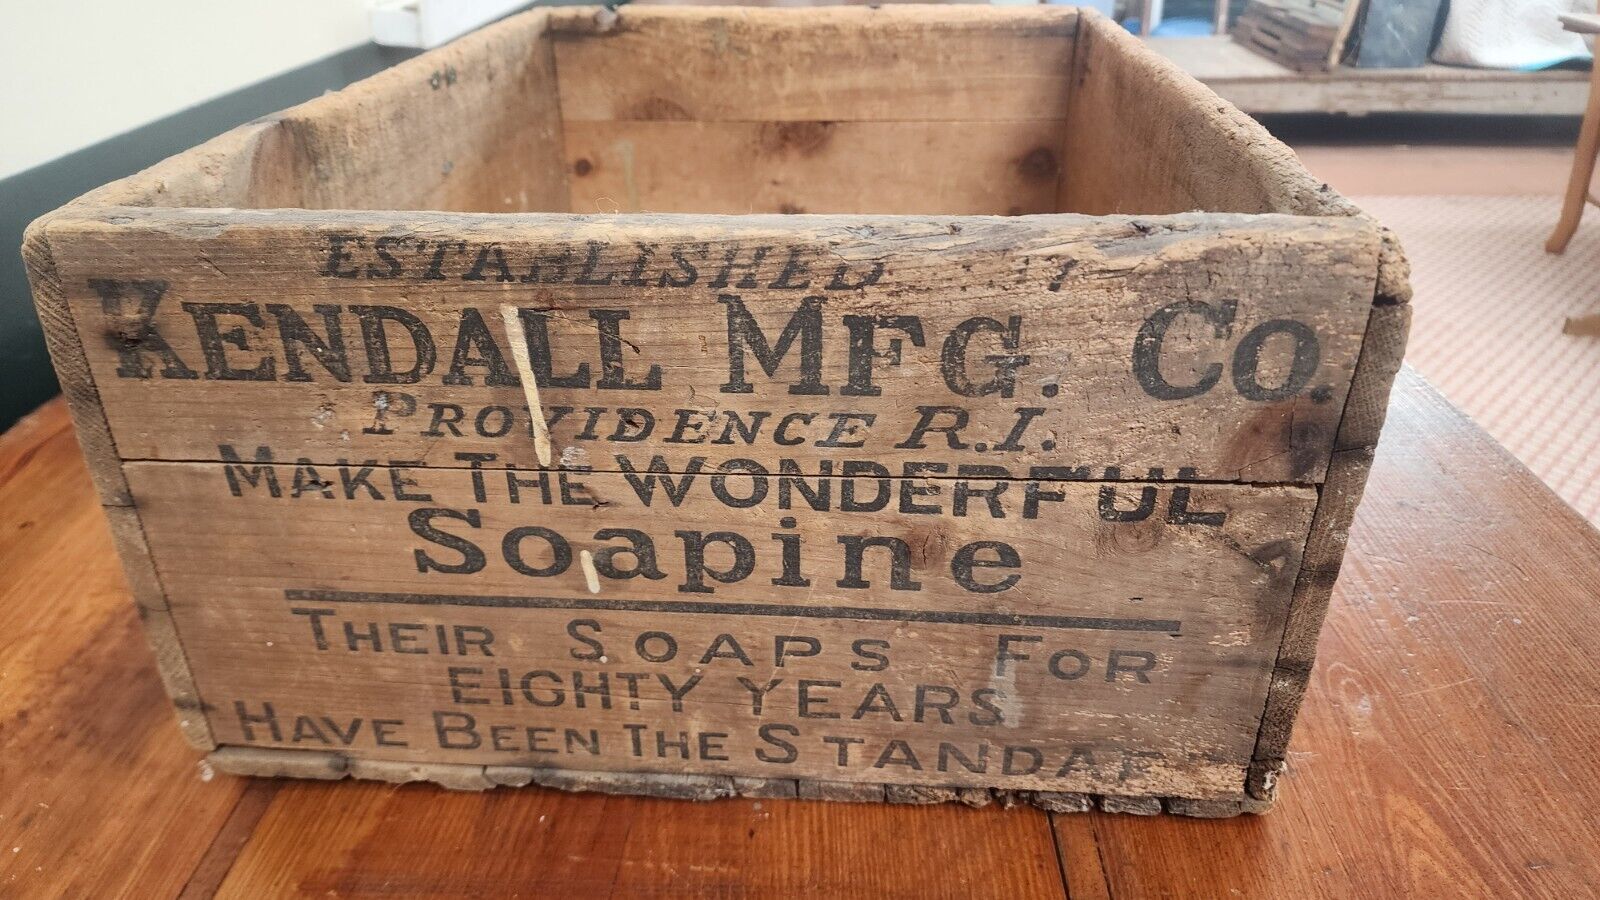 ANTIQUE SOAPINE FRENCH LAUNDRY SOAP PROVIDENCE R.I. U.S.A. KENDALL CO. PRIMITIVE